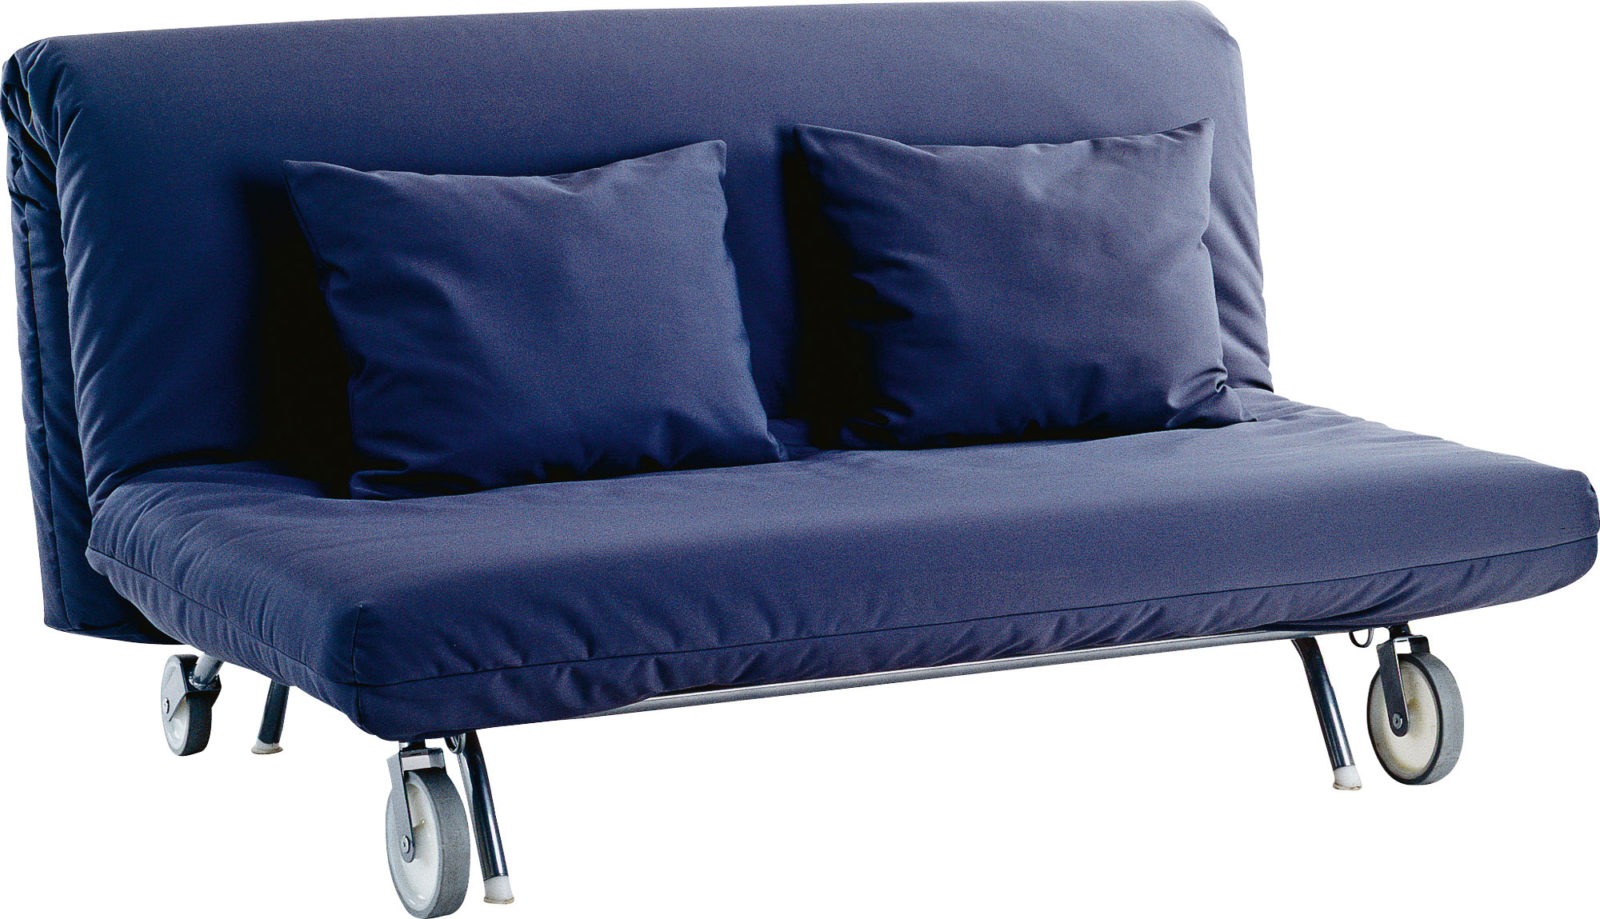 Blue two-seater sofa on wheels, IKEA PS sofa bed.